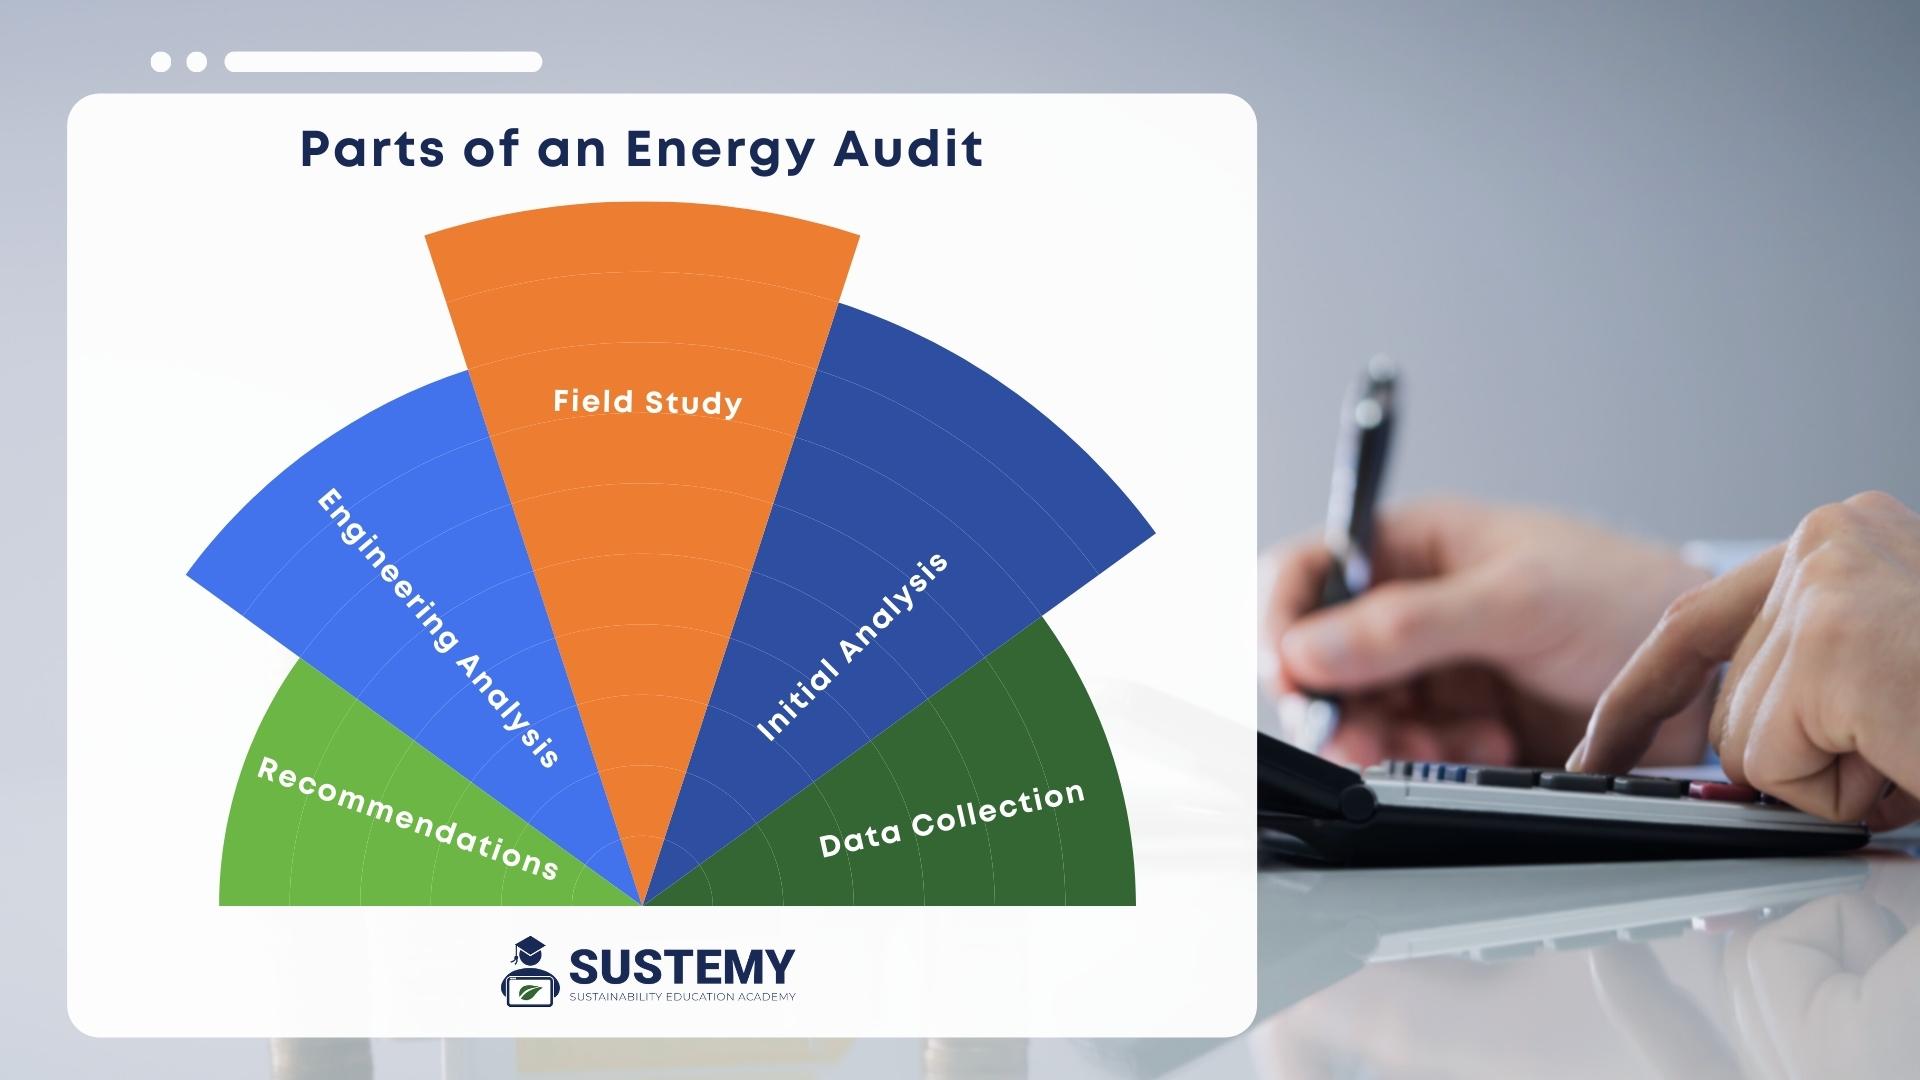 Pie showing the parts of an energy audit